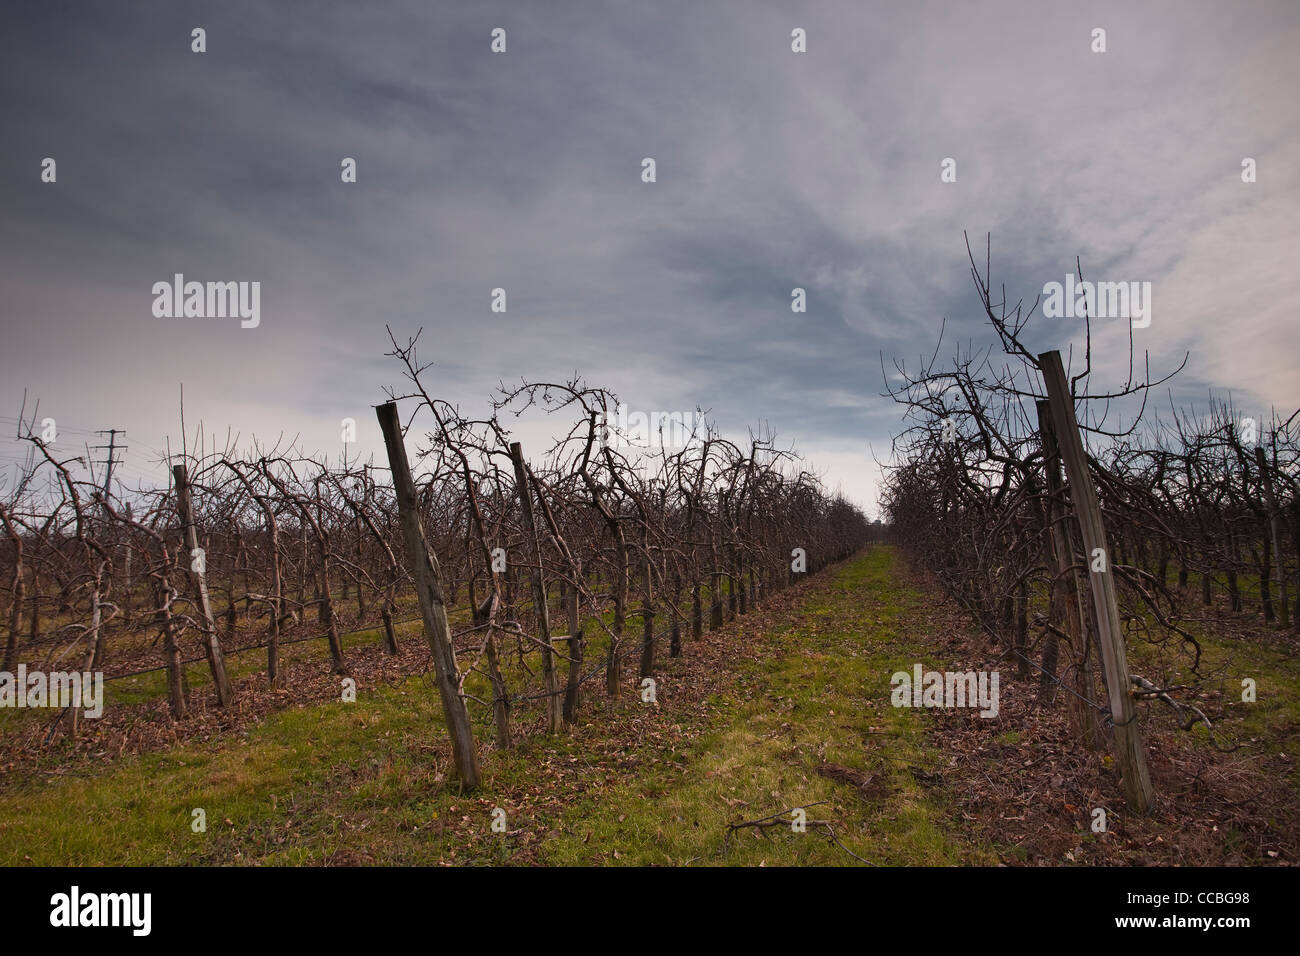 Row upon row of cherry trees near to Villandry, France. The trees themselves are nearly 2 metres in height. Stock Photo